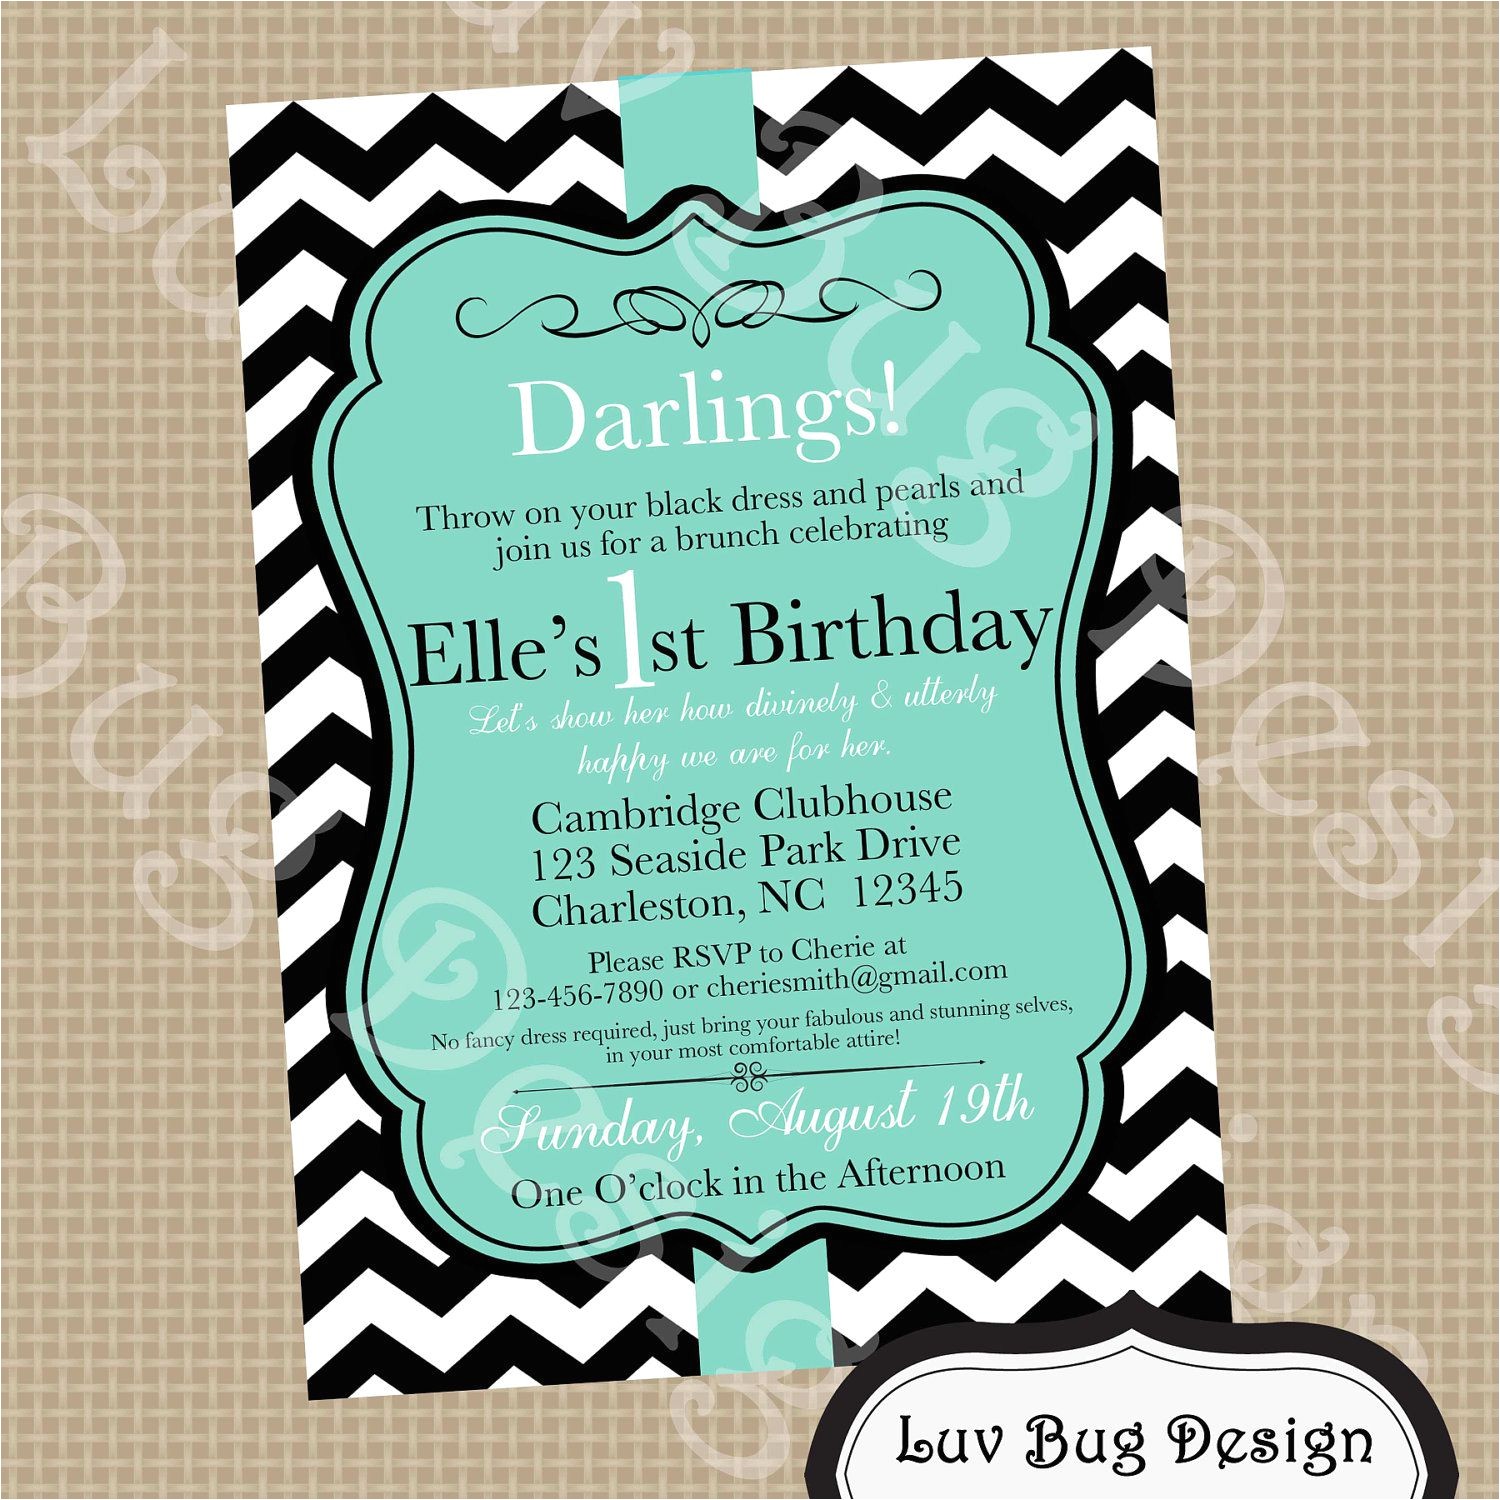 dress-code-wording-for-party-invitations-wmmfitness